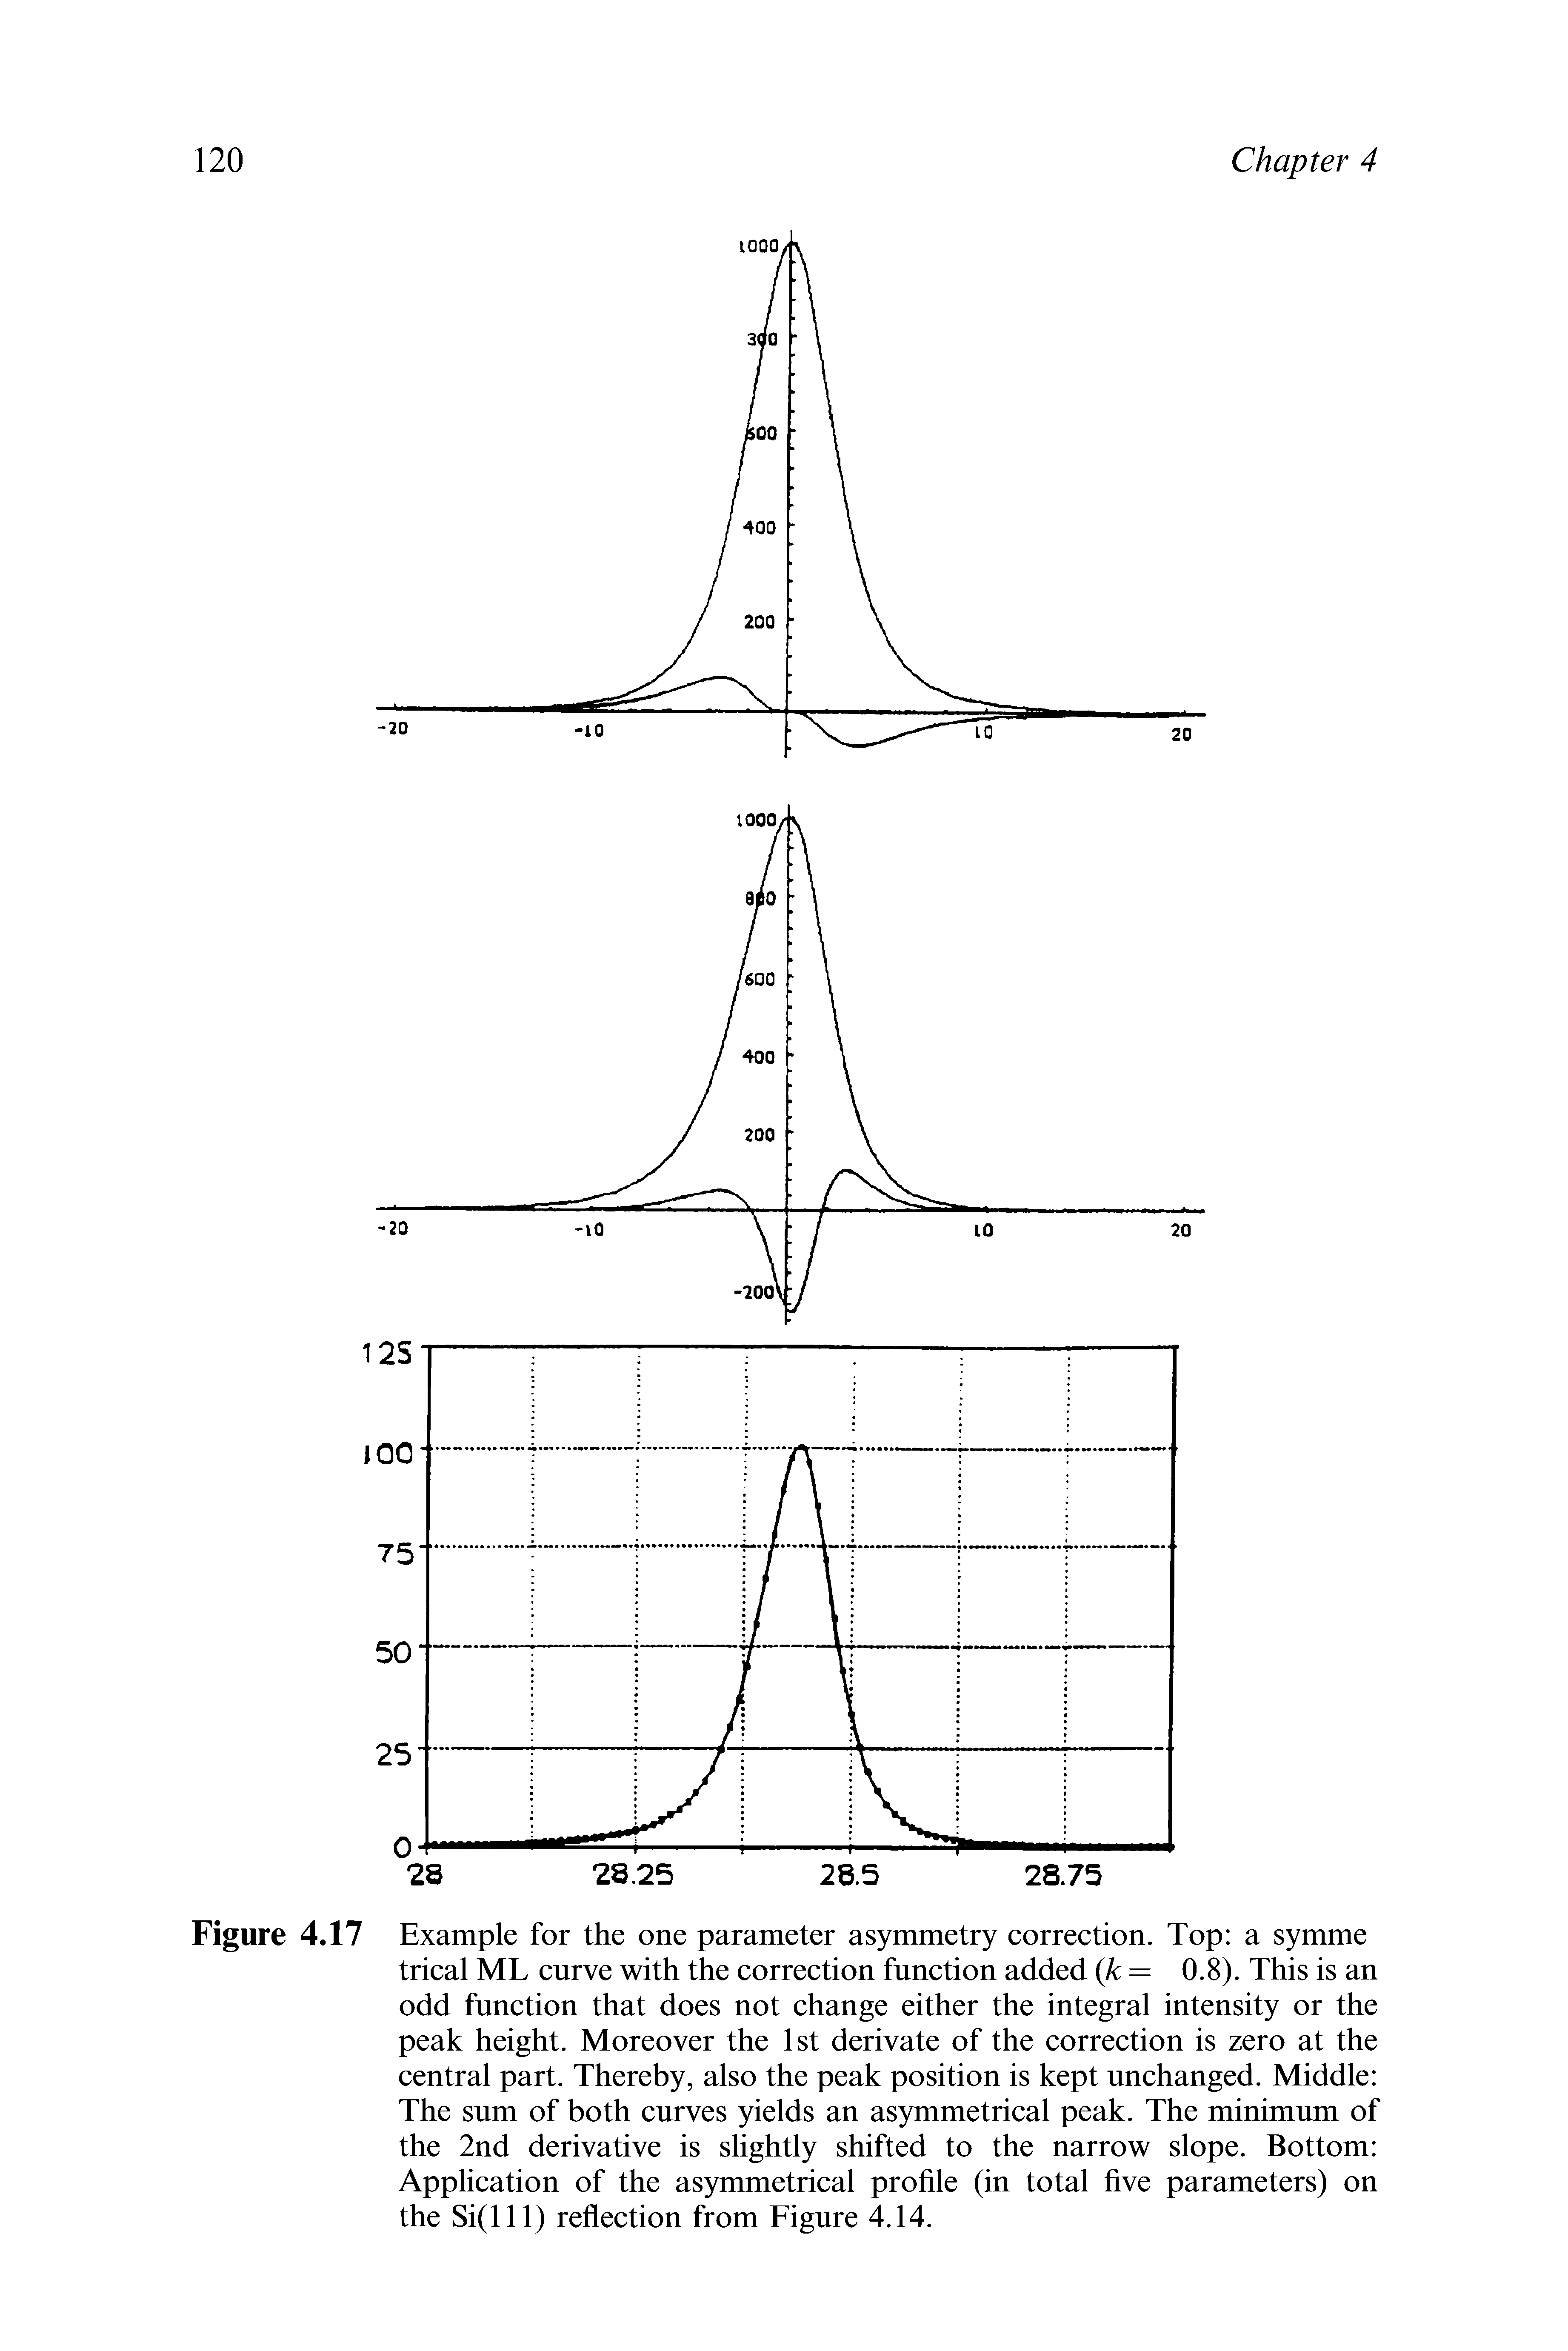 Figure 4.17 Example for the one parameter asymmetry correction. Top a symme trical ML curve with the correction function added k= 0.8). This is an odd function that does not change either the integral intensity or the peak height. Moreover the 1st derivate of the correction is zero at the central part. Thereby, also the peak position is kept unchanged. Middle The sum of both curves yields an asymmetrical peak. The minimum of the 2nd derivative is slightly shifted to the narrow slope. Bottom Application of the asymmetrical profile (in total five parameters) on the Si(lll) reflection from Figure 4.14.